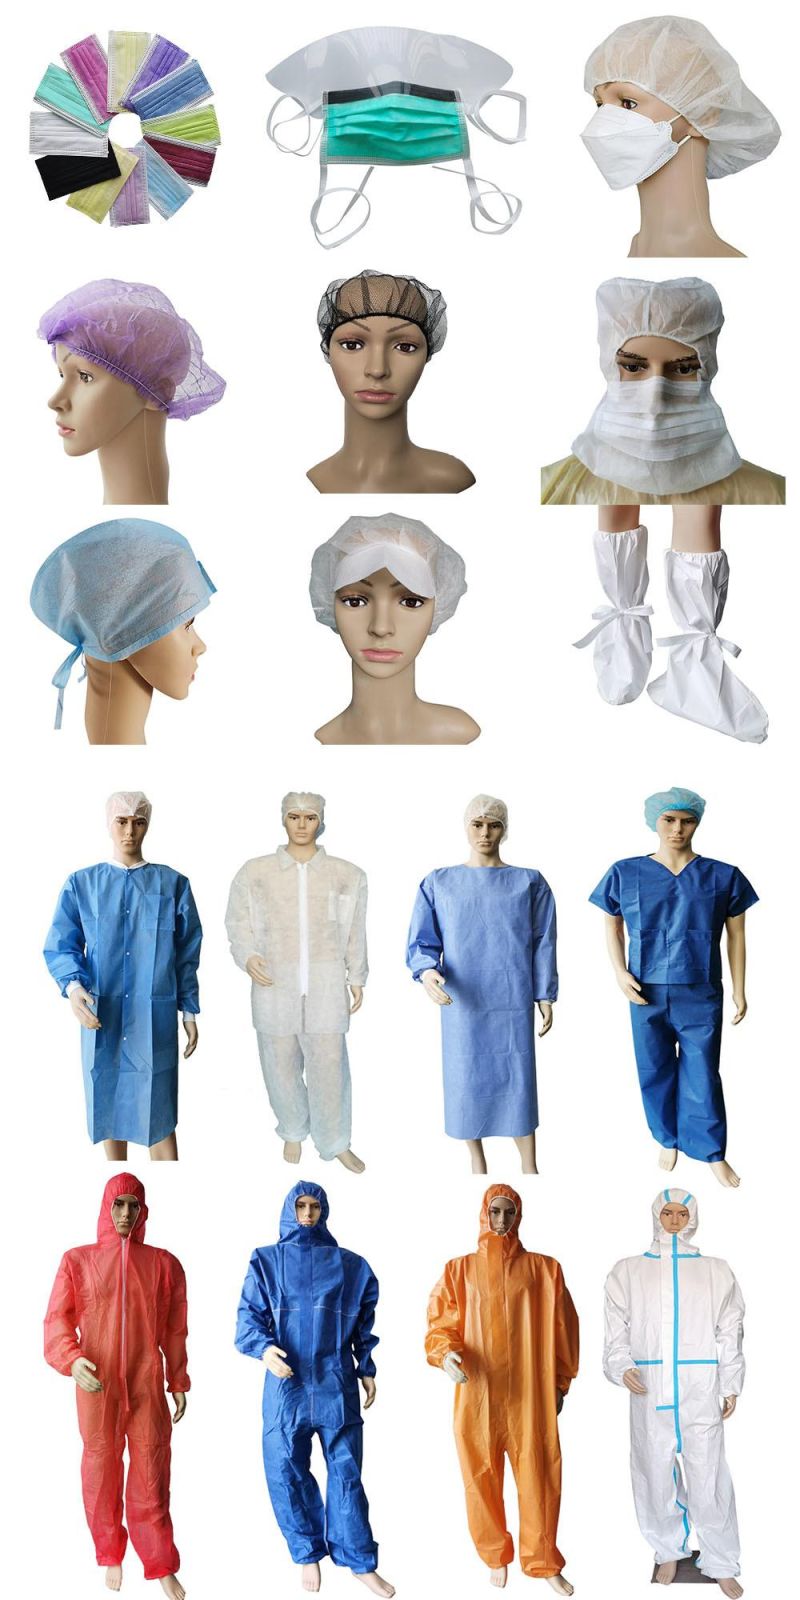 Professional Supplier 99% Filtration Protection Anti-Fluid Operating Room Healthcare Disposable Latex Free Polypropylene Face Cover Face Mask